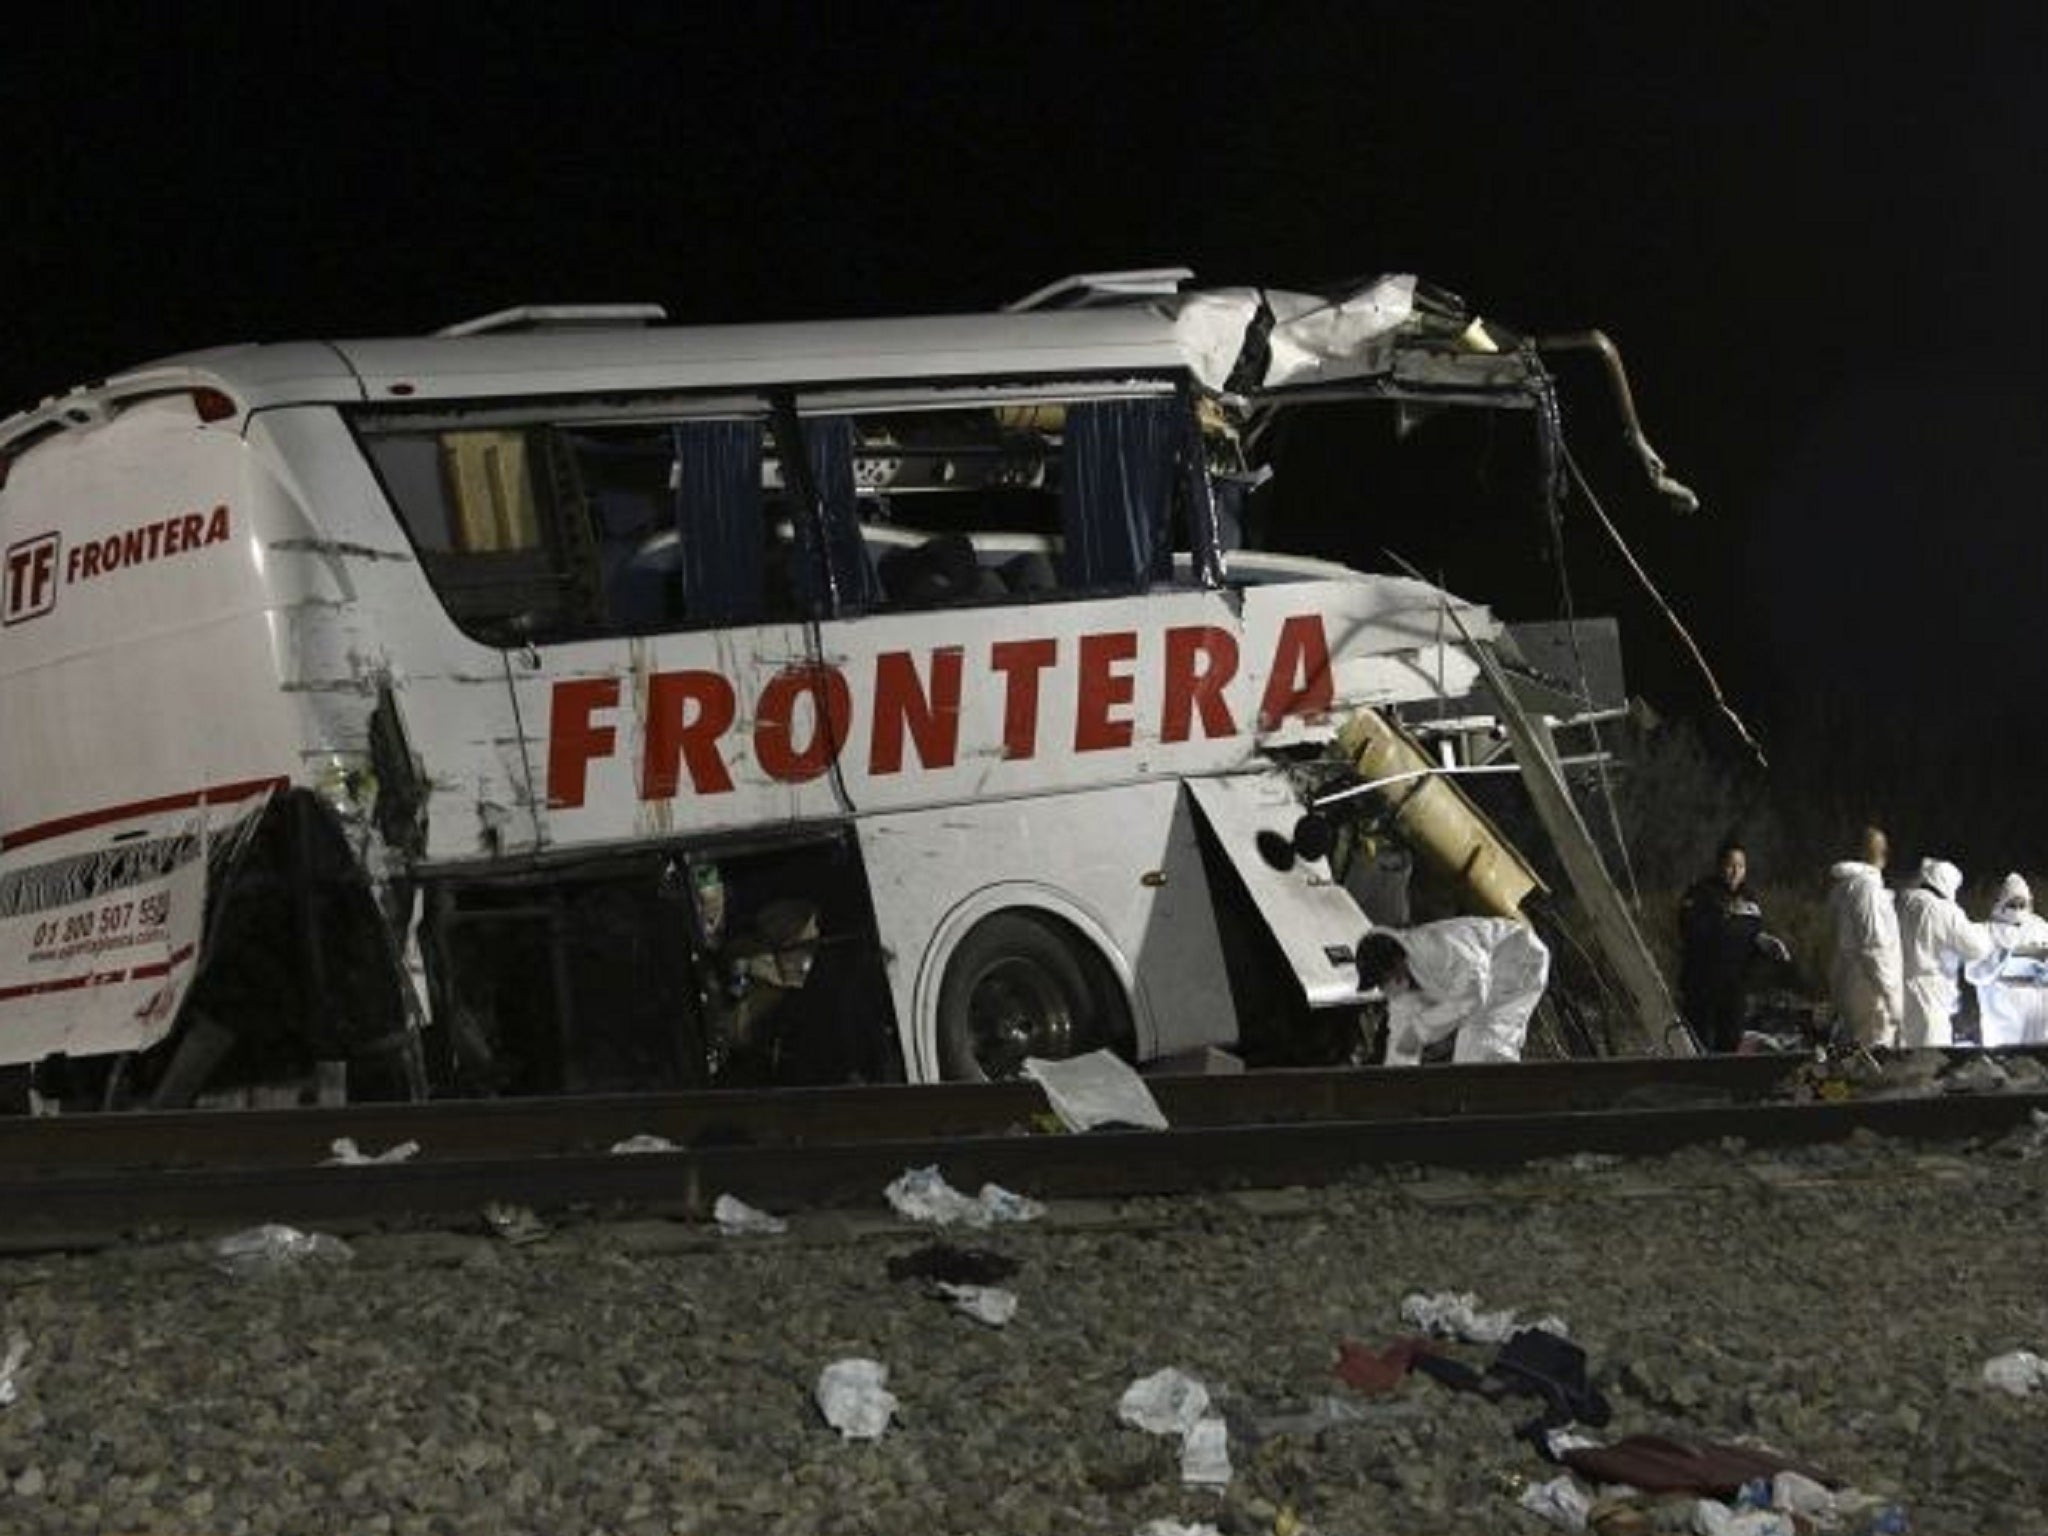 At least 16 passengers on the bus died in the crash with a freight train in Mexico